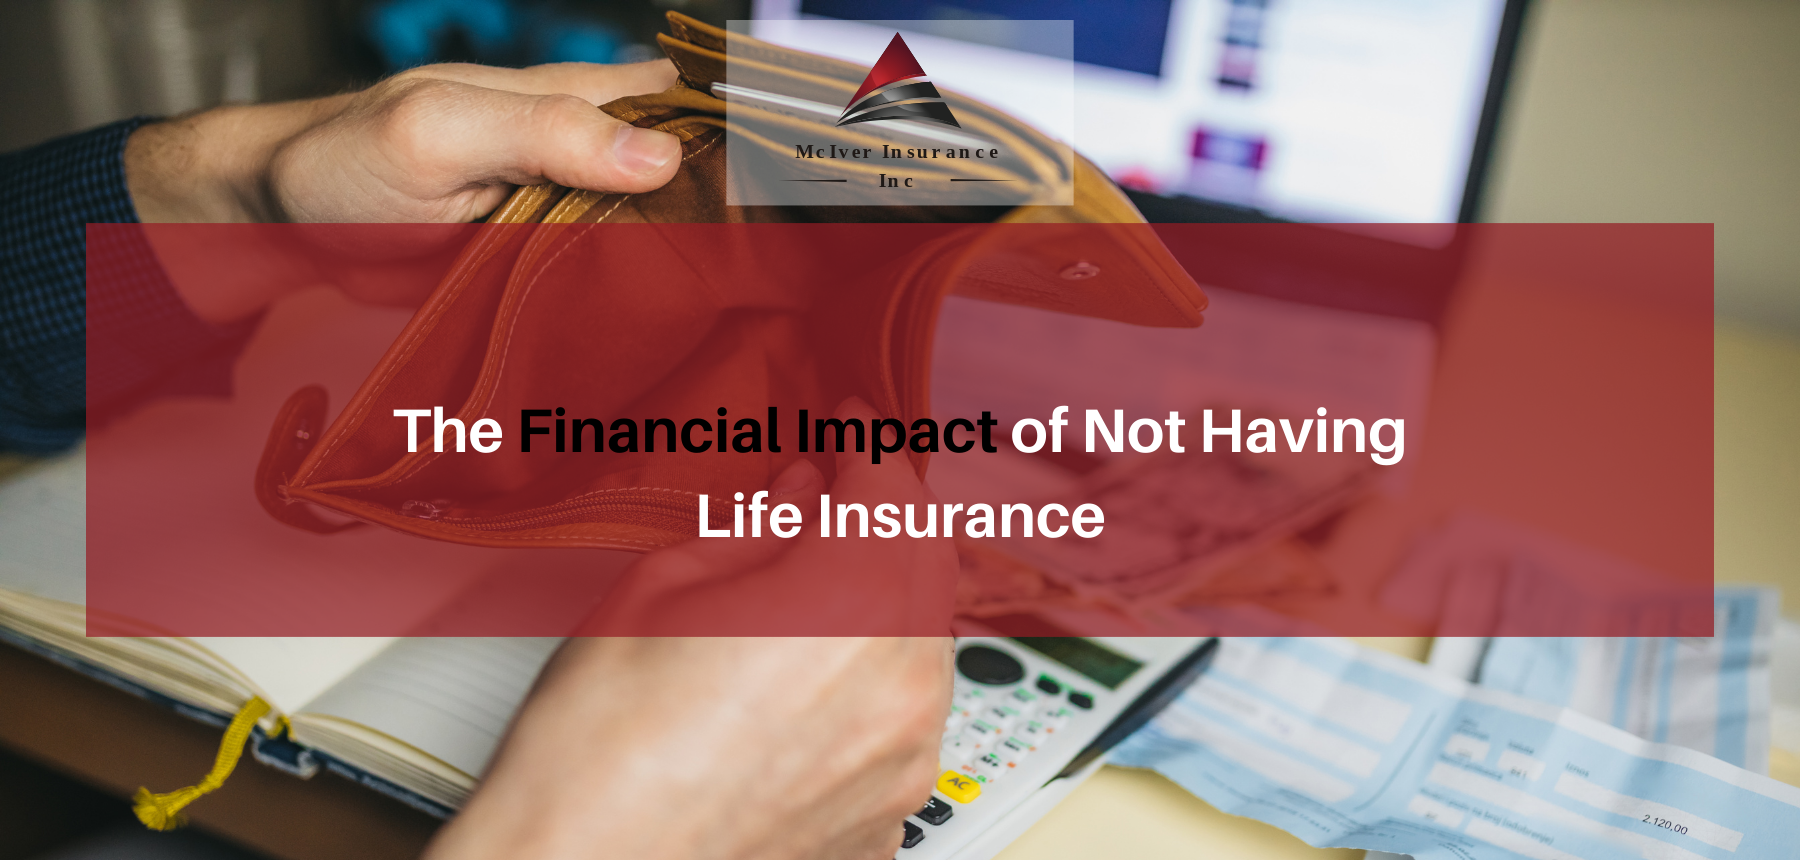 The Financial Impact of Not Having Life Insurance